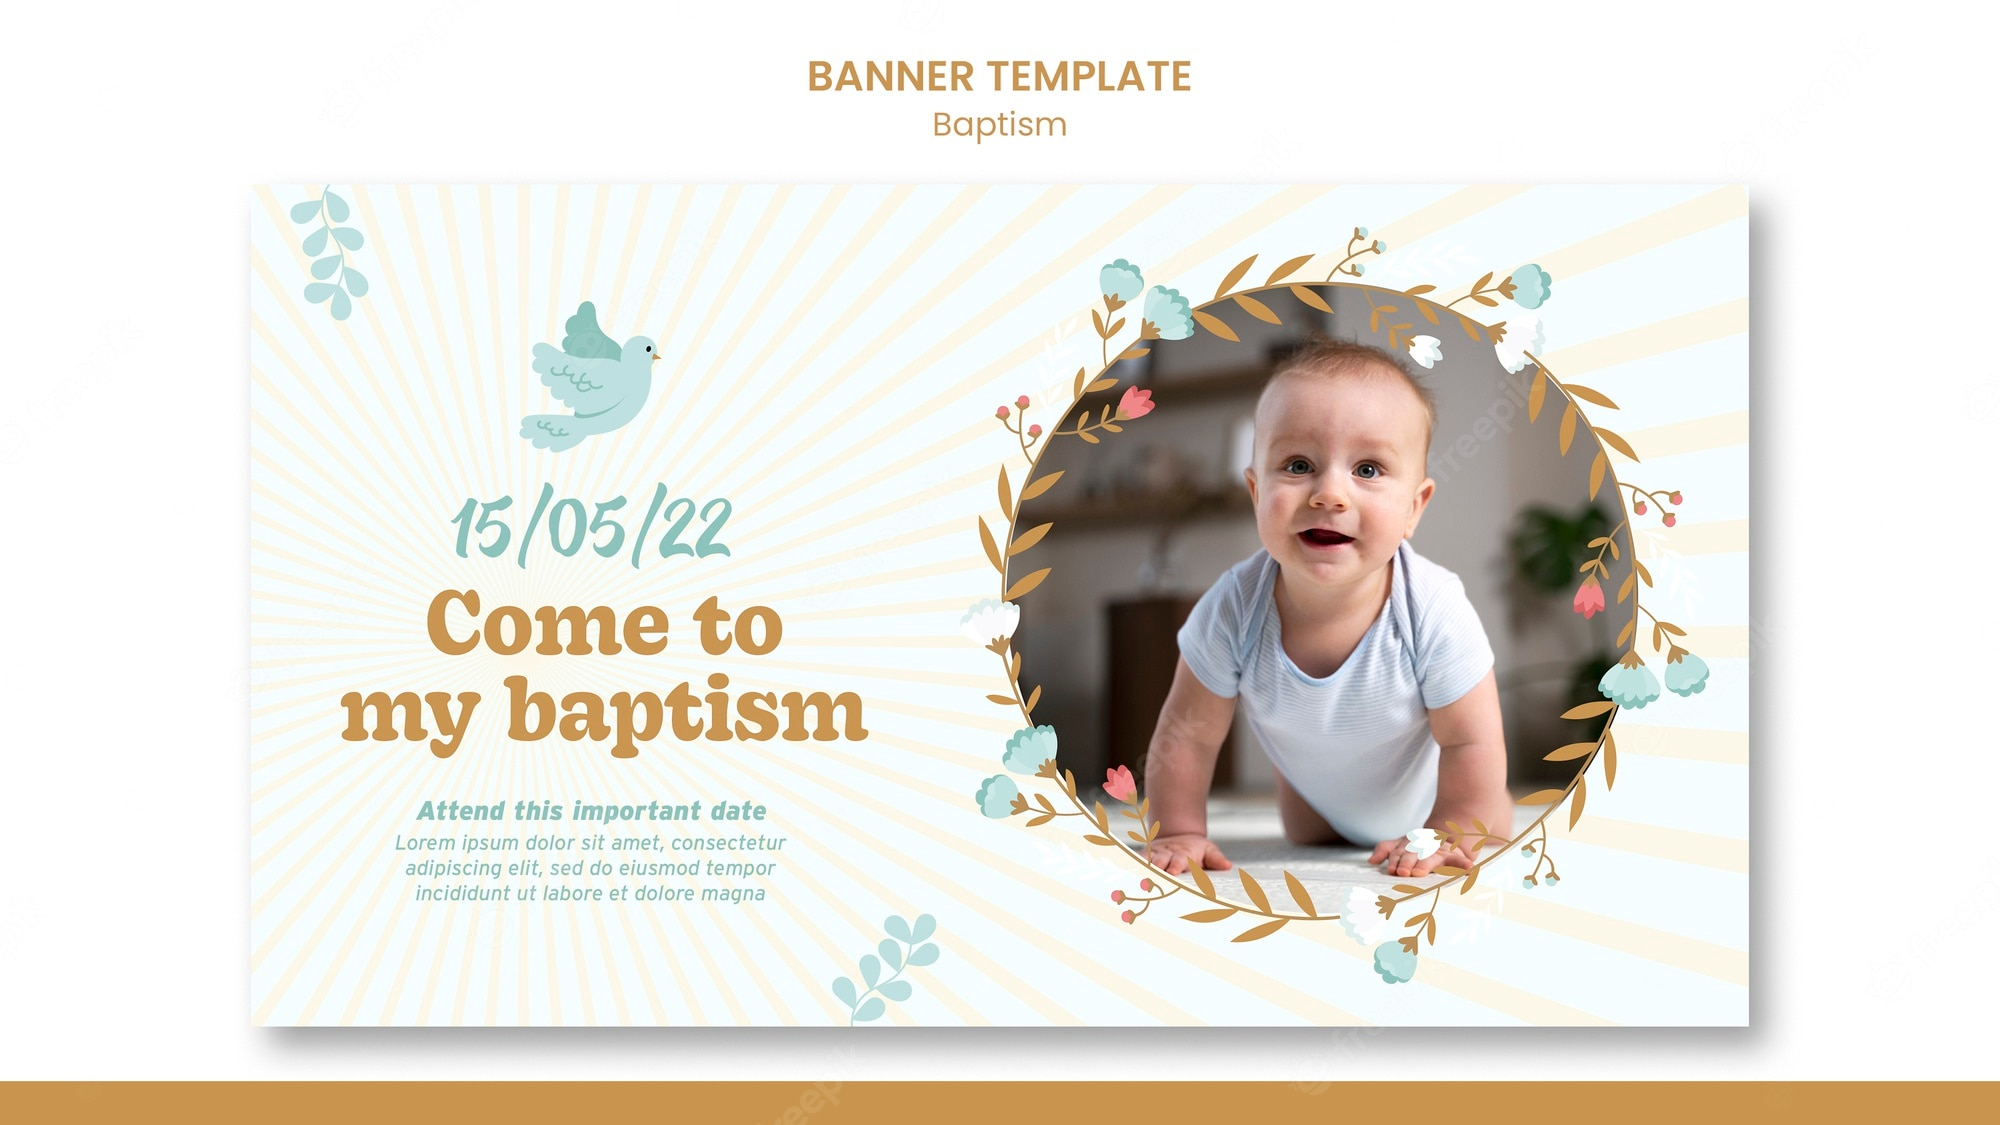 Christening banner Images  Free Vectors, Stock Photos & PSD In Christening Banner Template Free